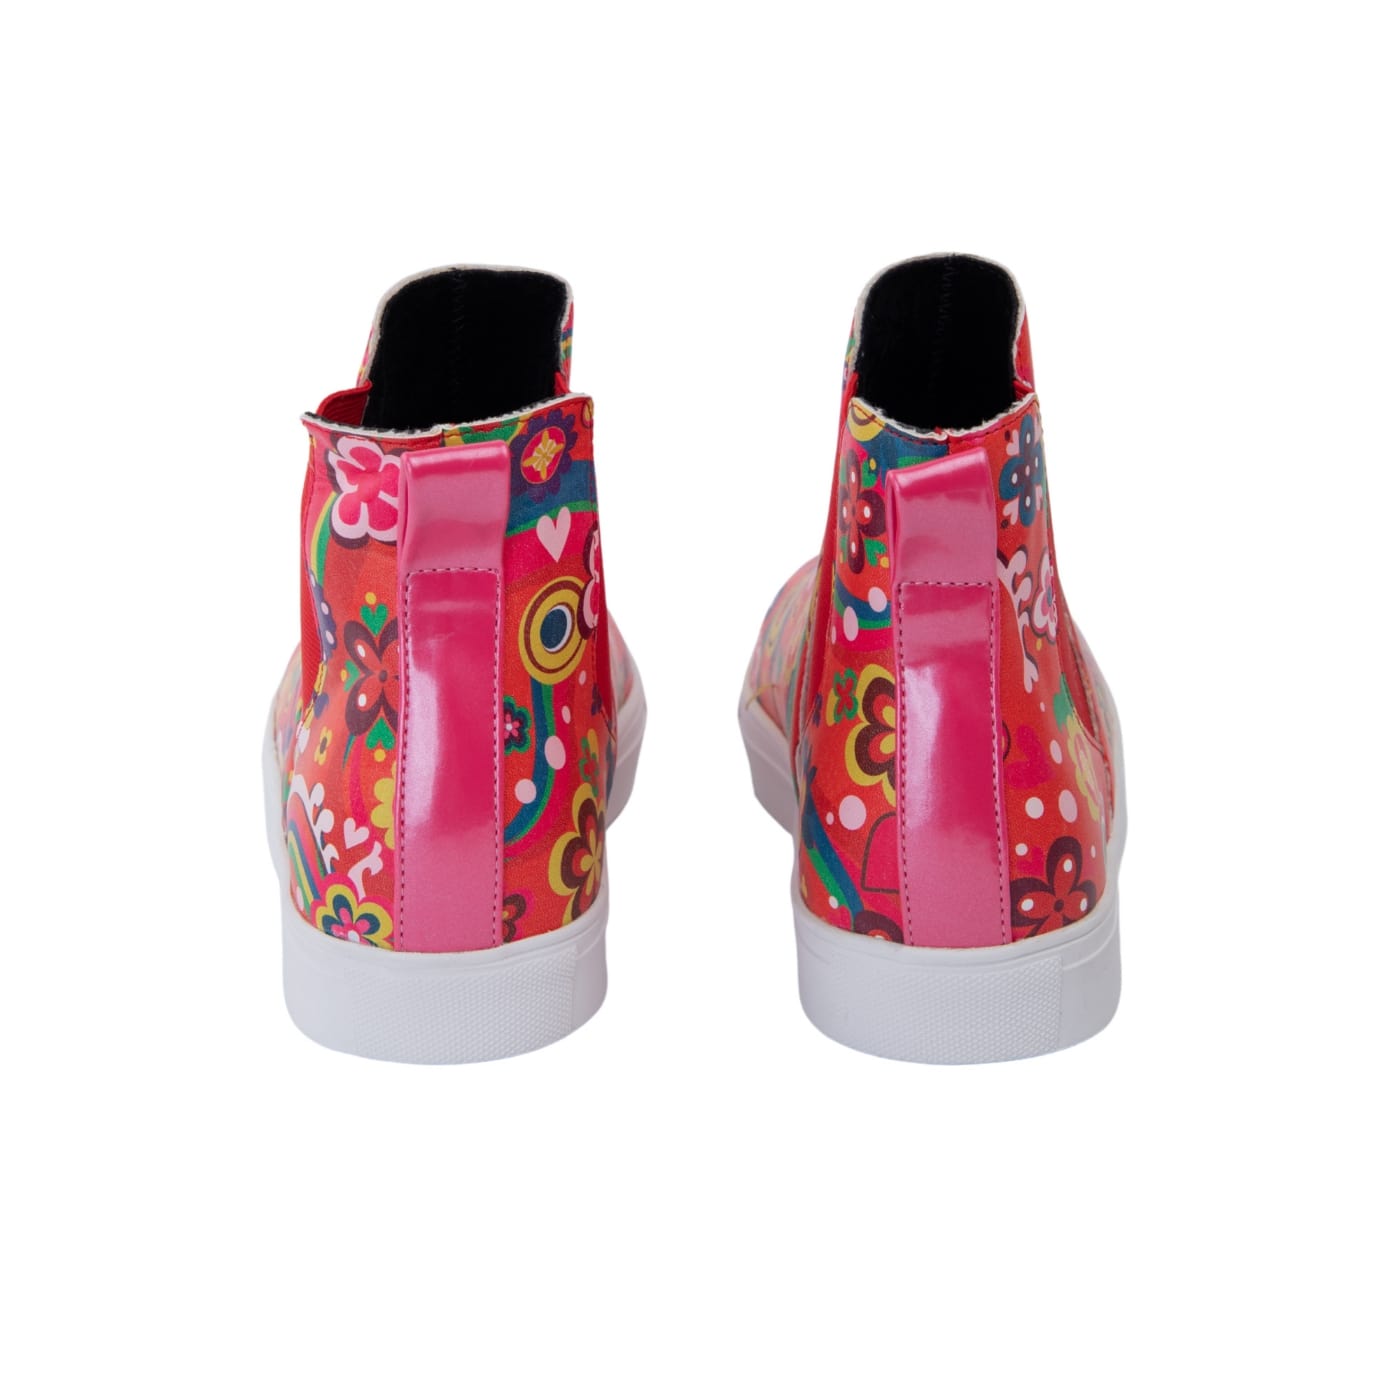 Groovy Remix Hi Tops by RainbowsAndFairies.com.au (Psychedelic - Chelsea Boots - Woodstock - Hippy - Vibrant - Mismatched Shoes - Elastic Side Boots) - SKU: FW_HITOP_GROOV_REM - Pic-06